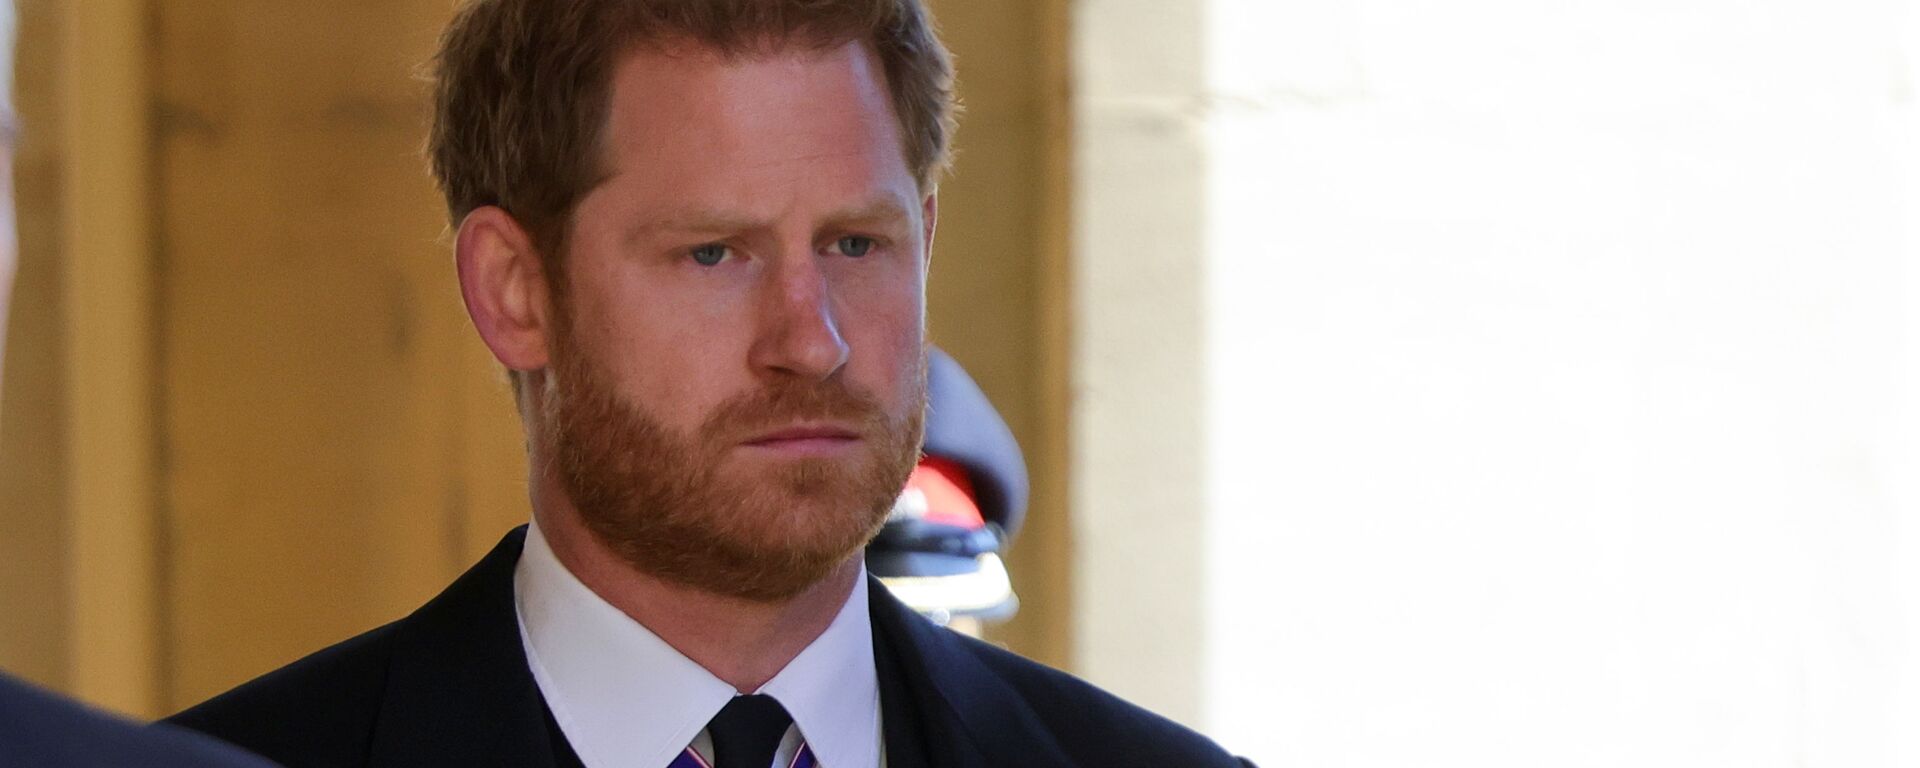 Britain's Prince Harry, Duke of Sussex looks on as he attends the funeral of Britain's Prince Philip, husband of Queen Elizabeth, who died at the age of 99, in Windsor, Britain, 17 April 2021 - Sputnik International, 1920, 16.05.2021